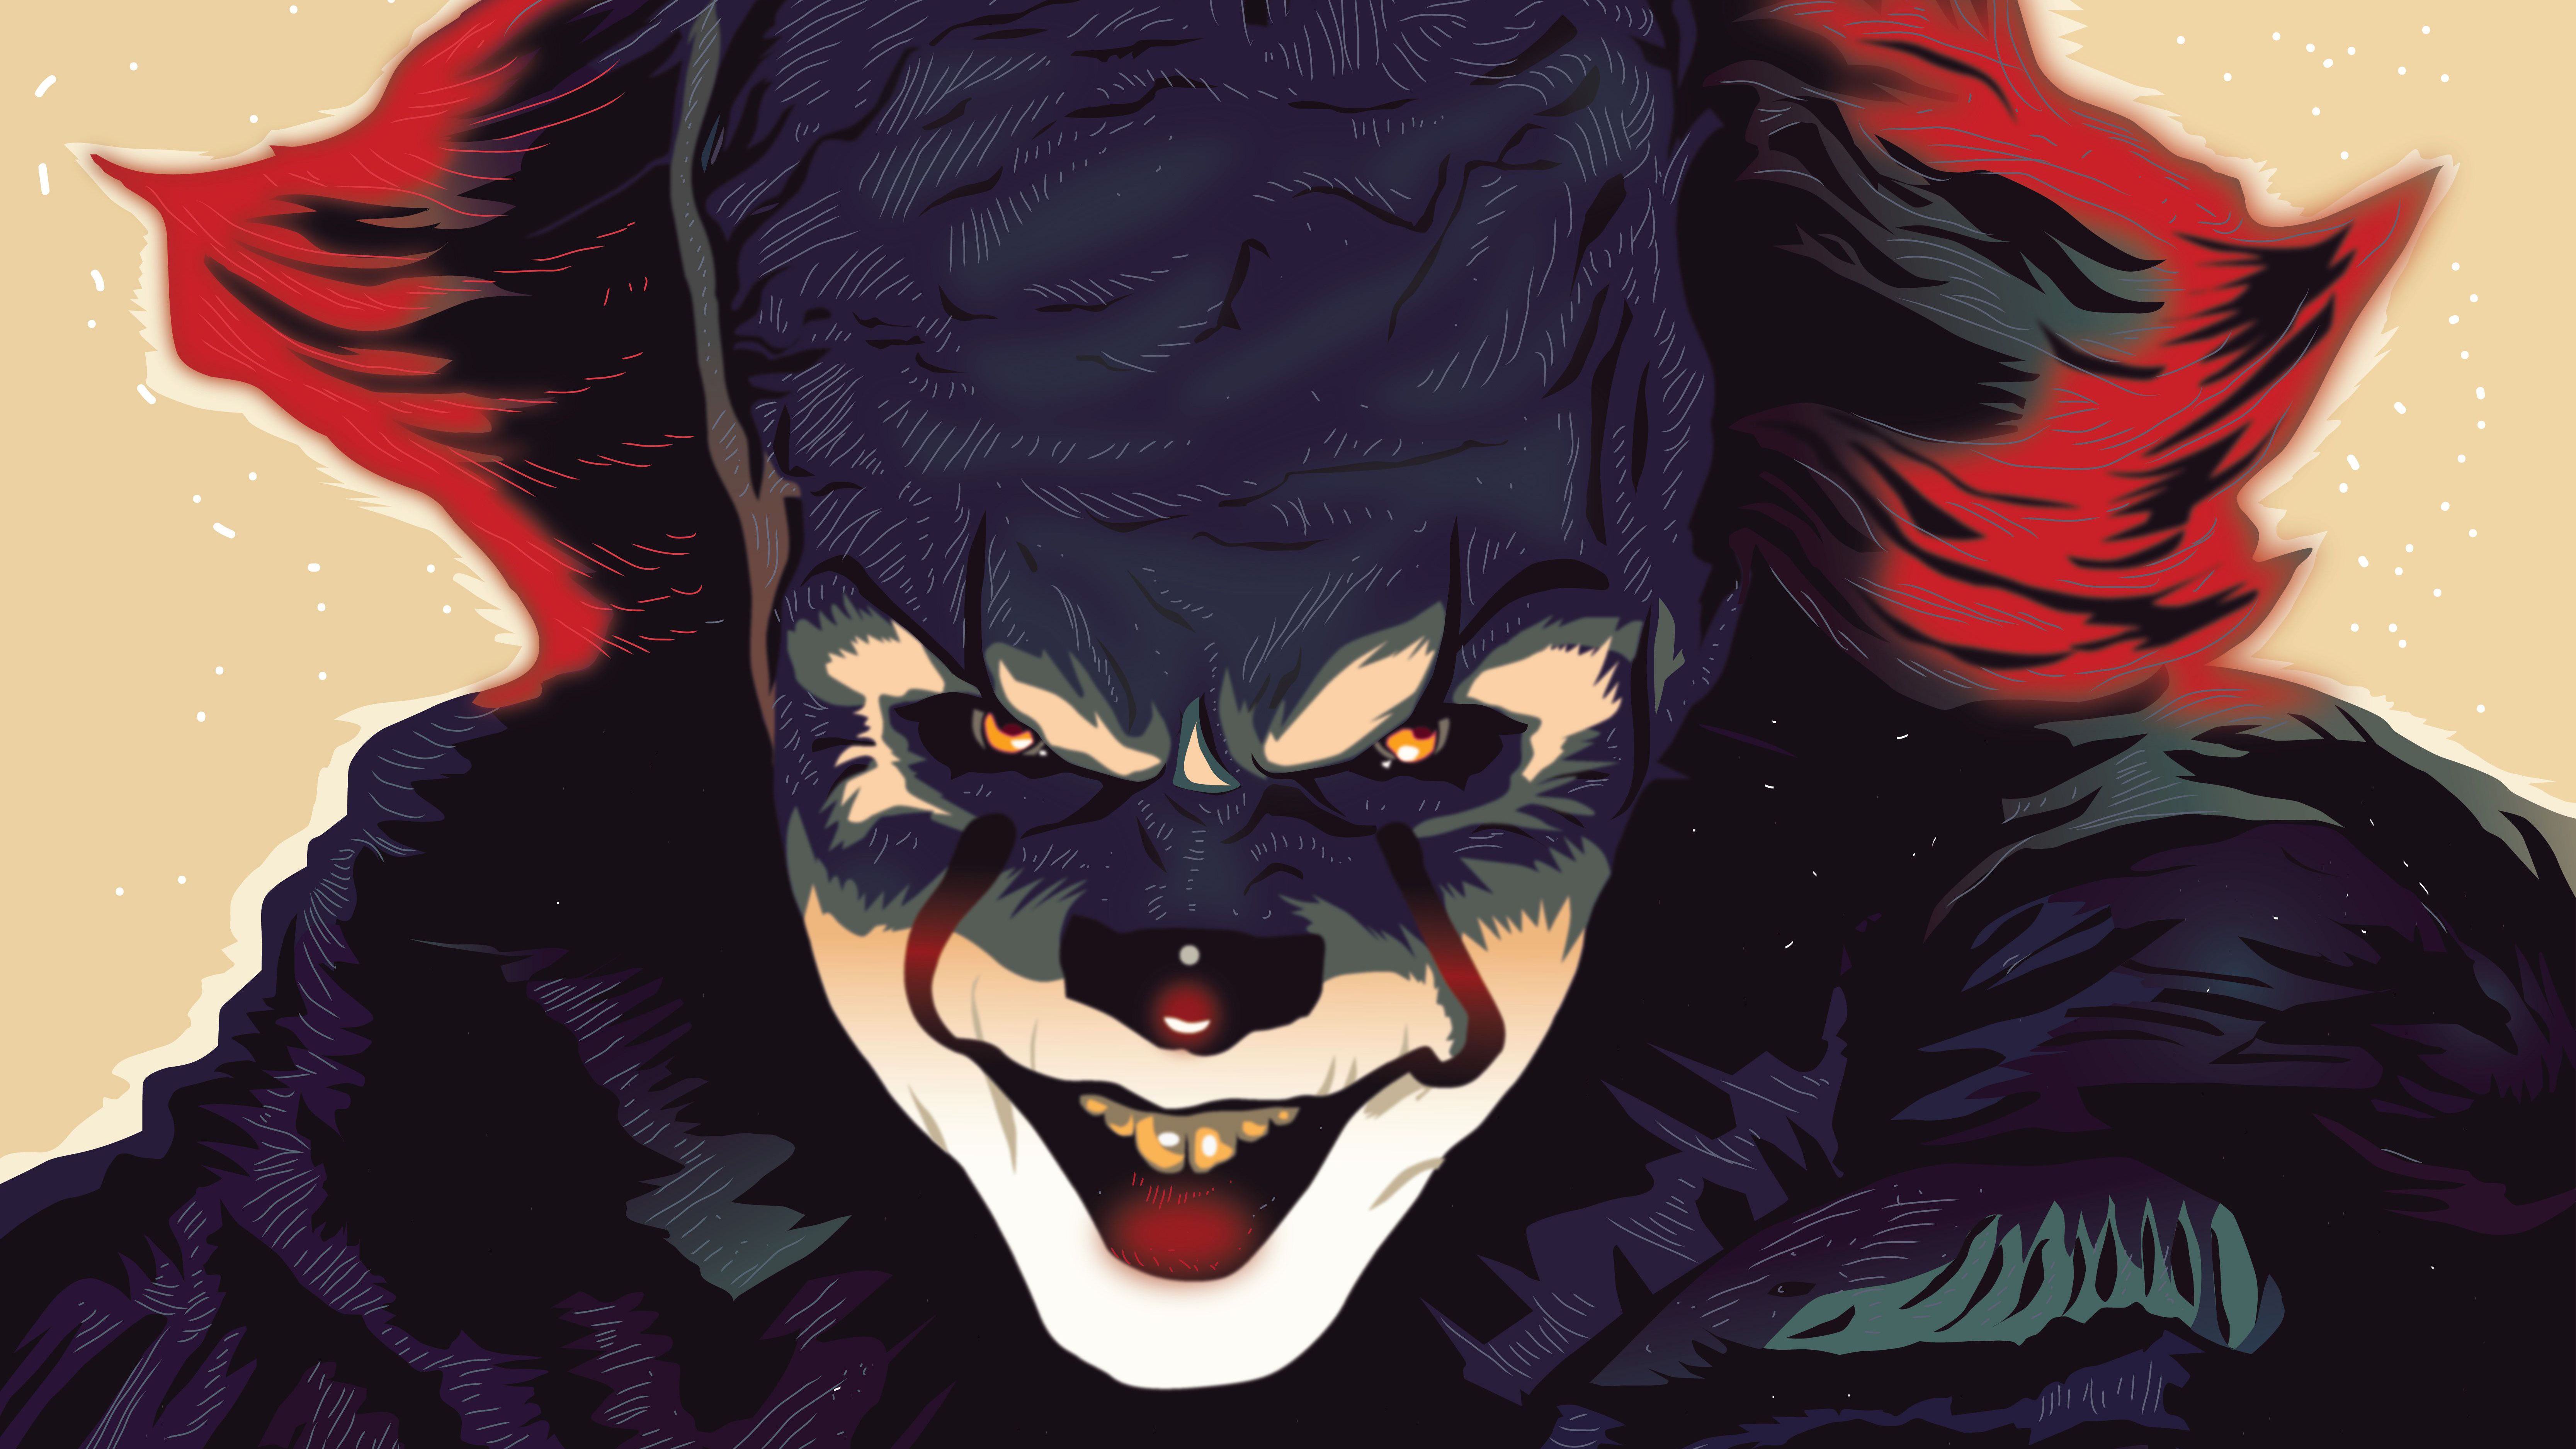 Wallpapers of It, Movie, Art, Clown backgrounds & HD image.